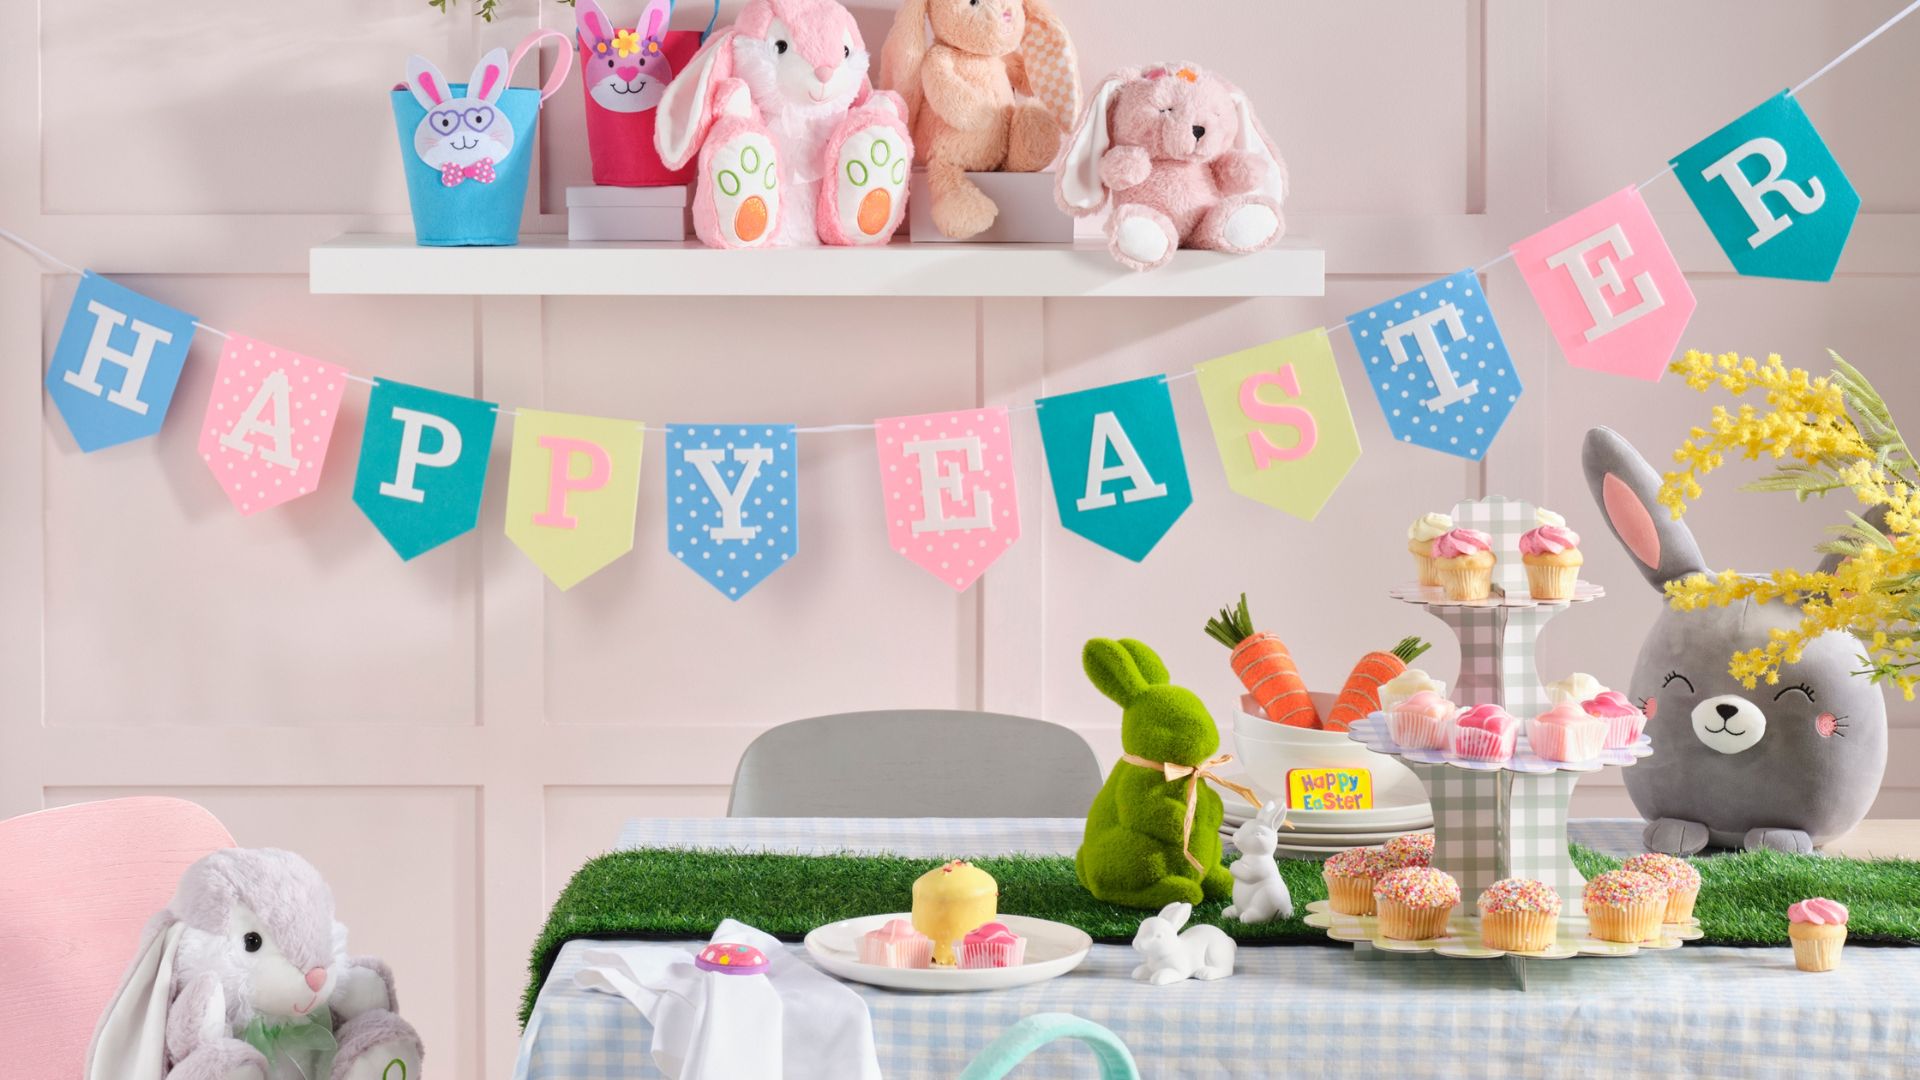 Happy Easter bunting, rabbit themed table decor, turf grass table runner and cupcakes